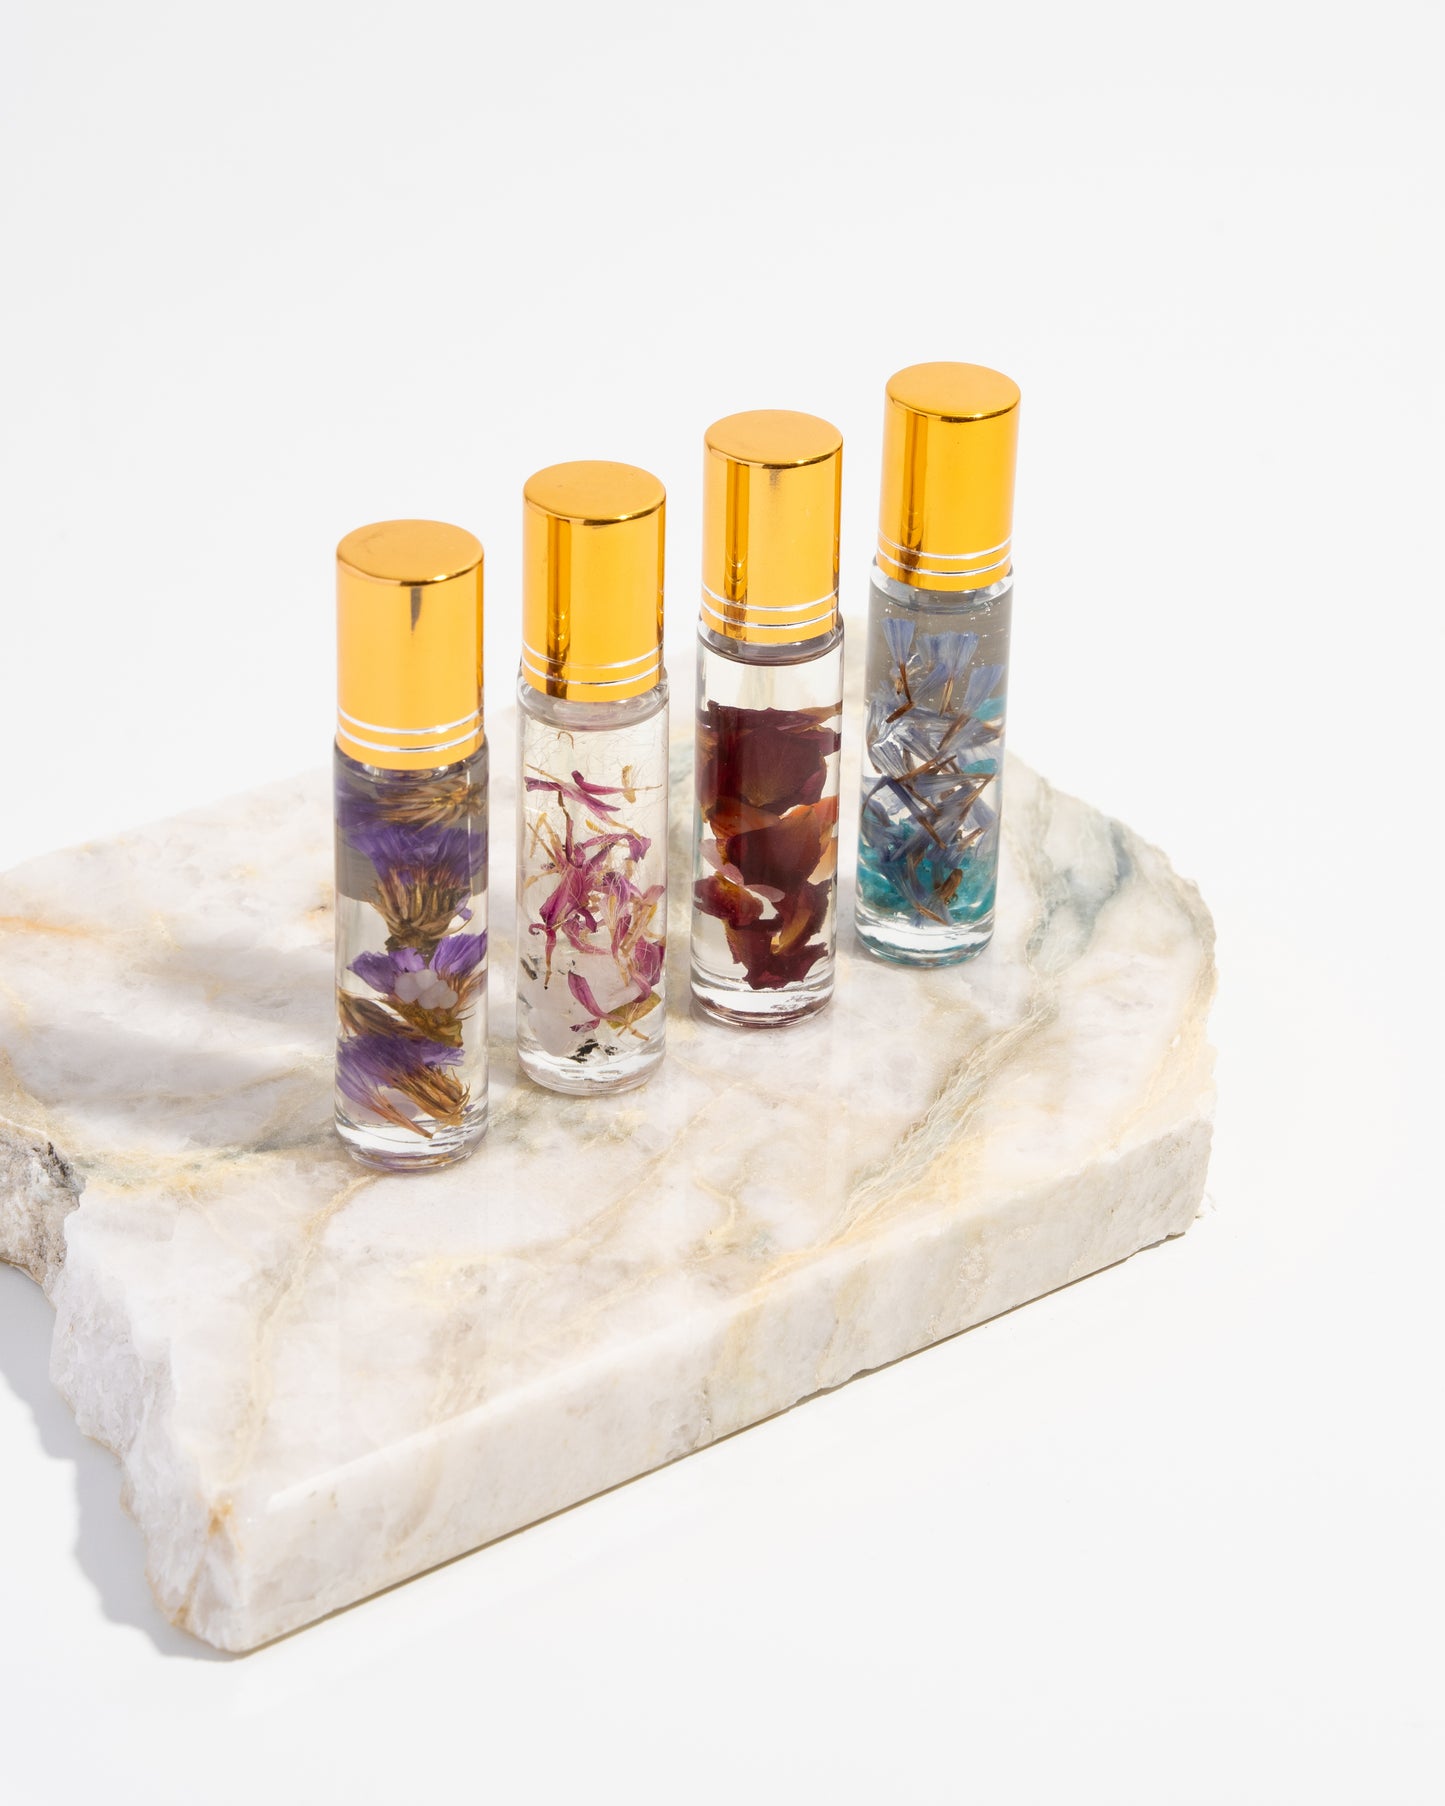 Fragrance potion gift set- All four of our floral and crystal oil roller perfumes!